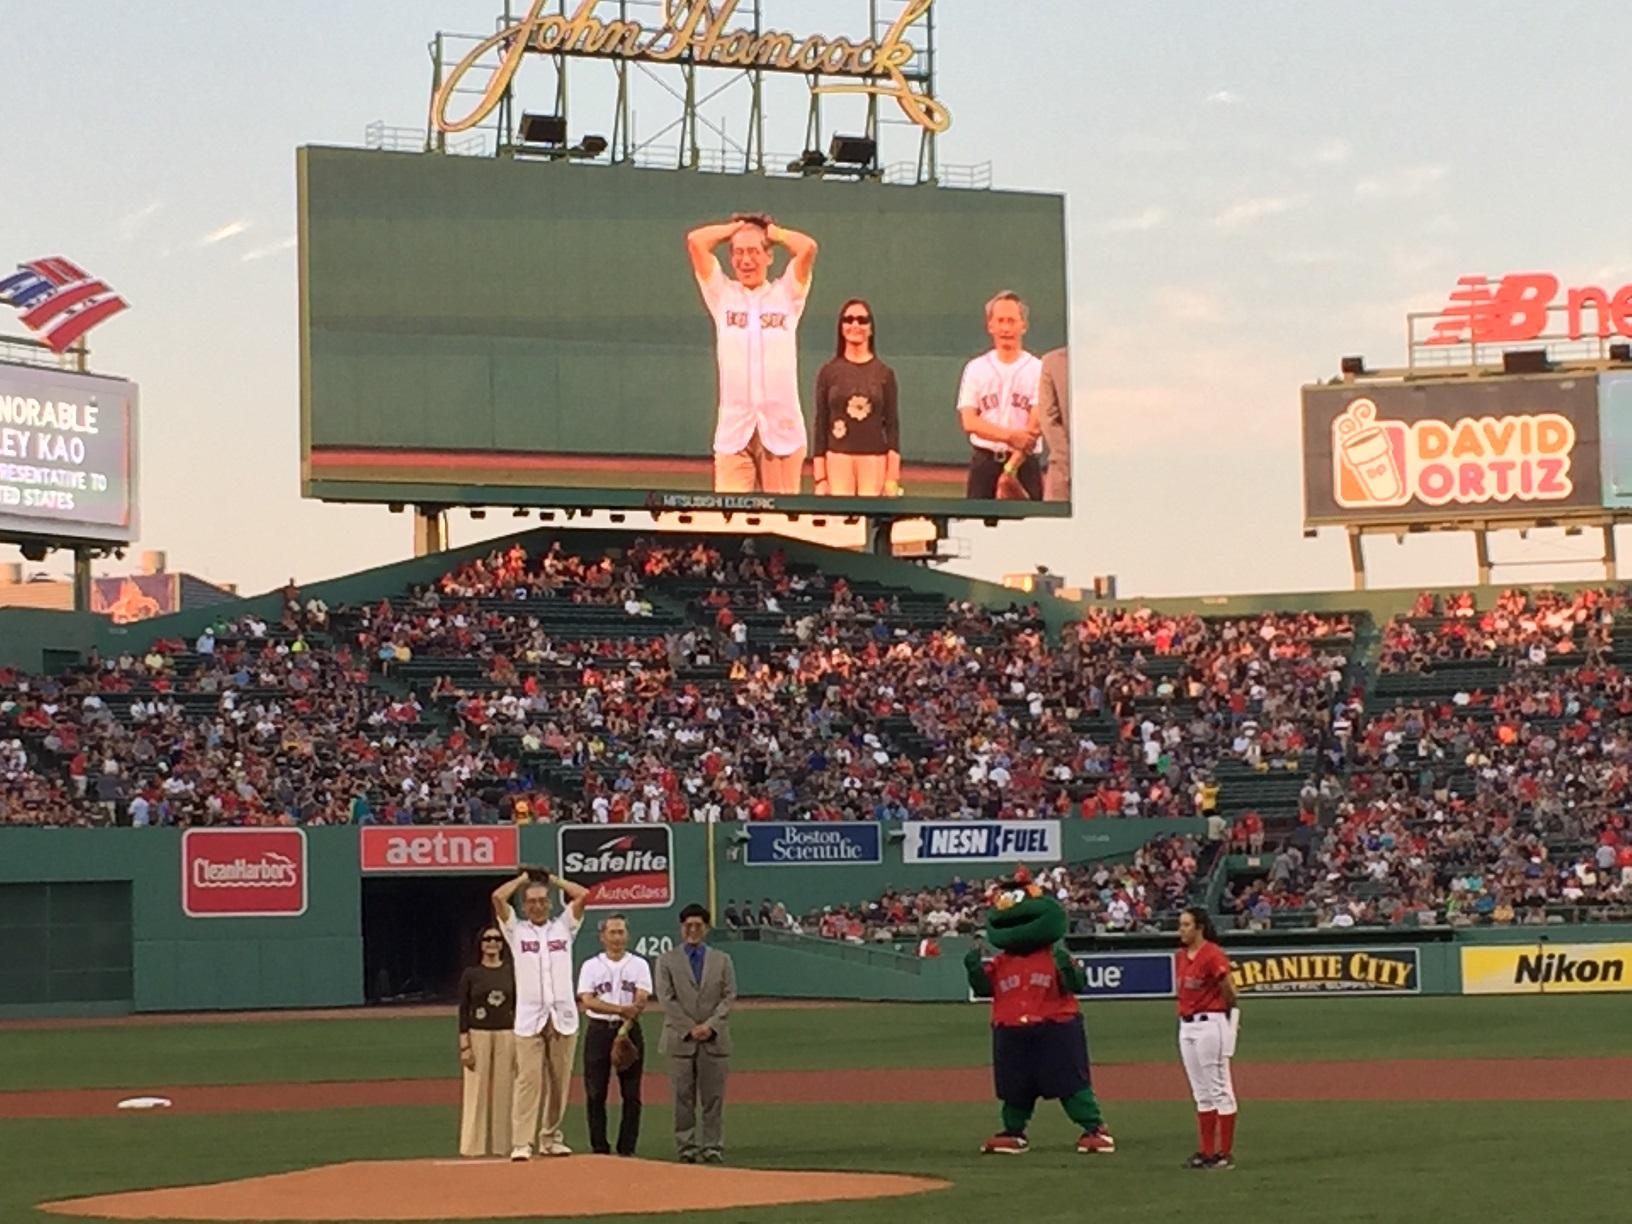 Taiwan's Representative to the United States Stanley Kao (高碩泰) throws out the first pitch at a Major League Baseball (MLB) game in Boston August 26, 2016, in which the Boston Red Sox played the Kansas City Royals.